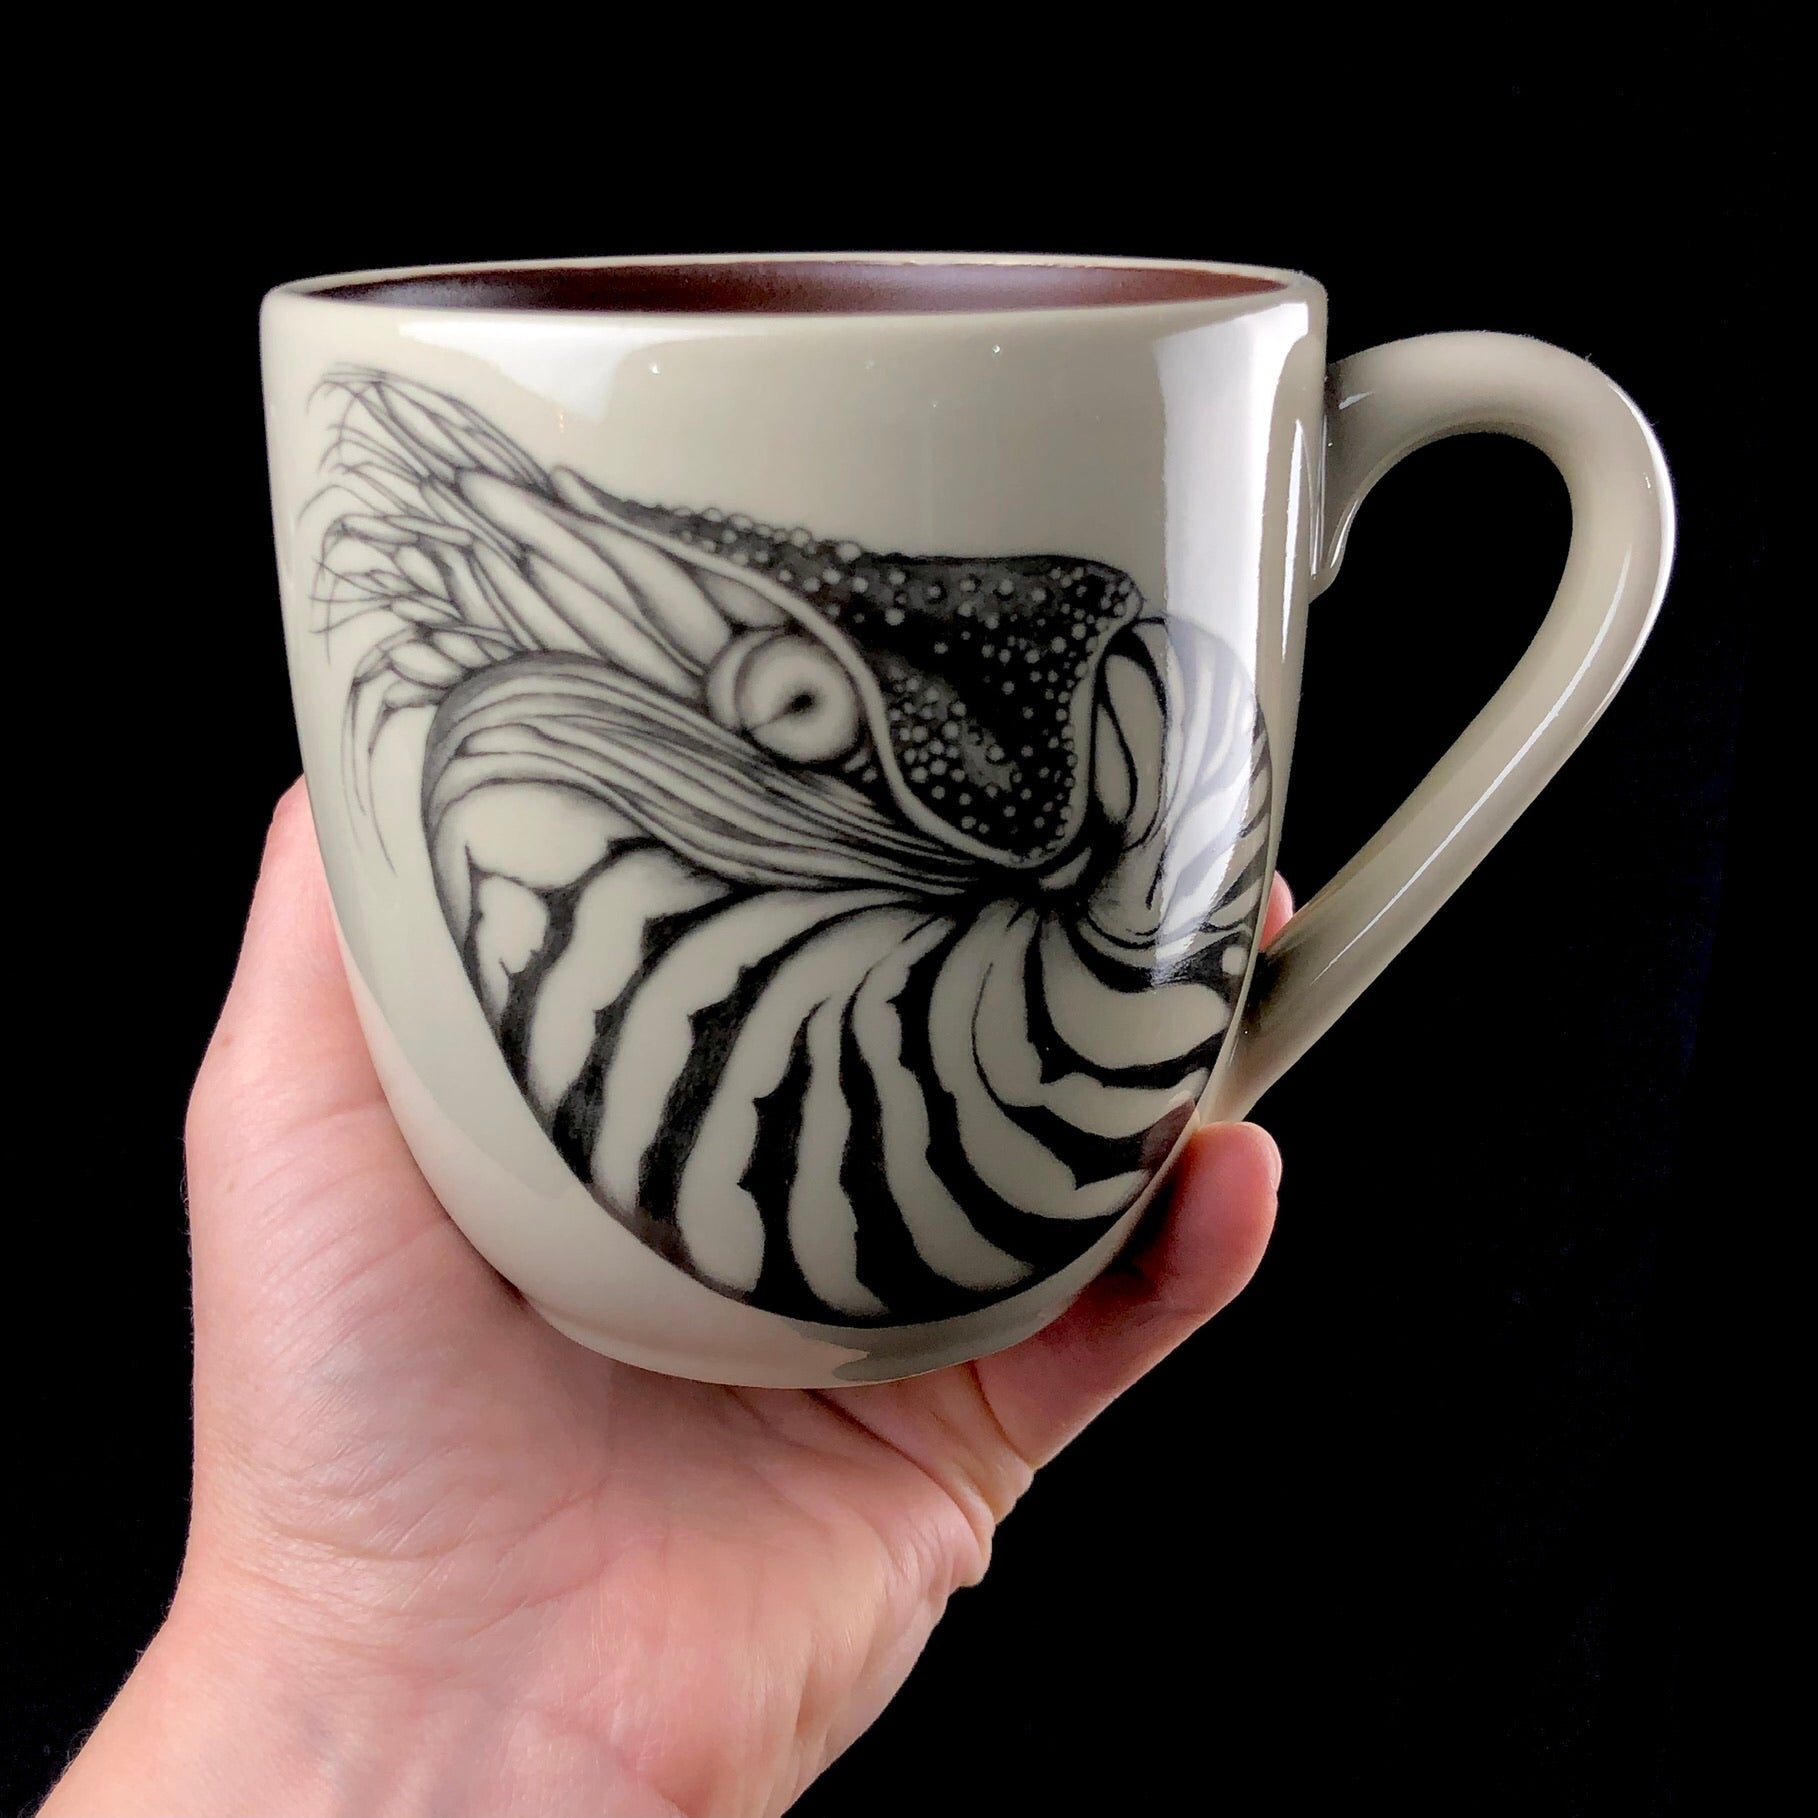 Nautilus Mug in hand for size reference